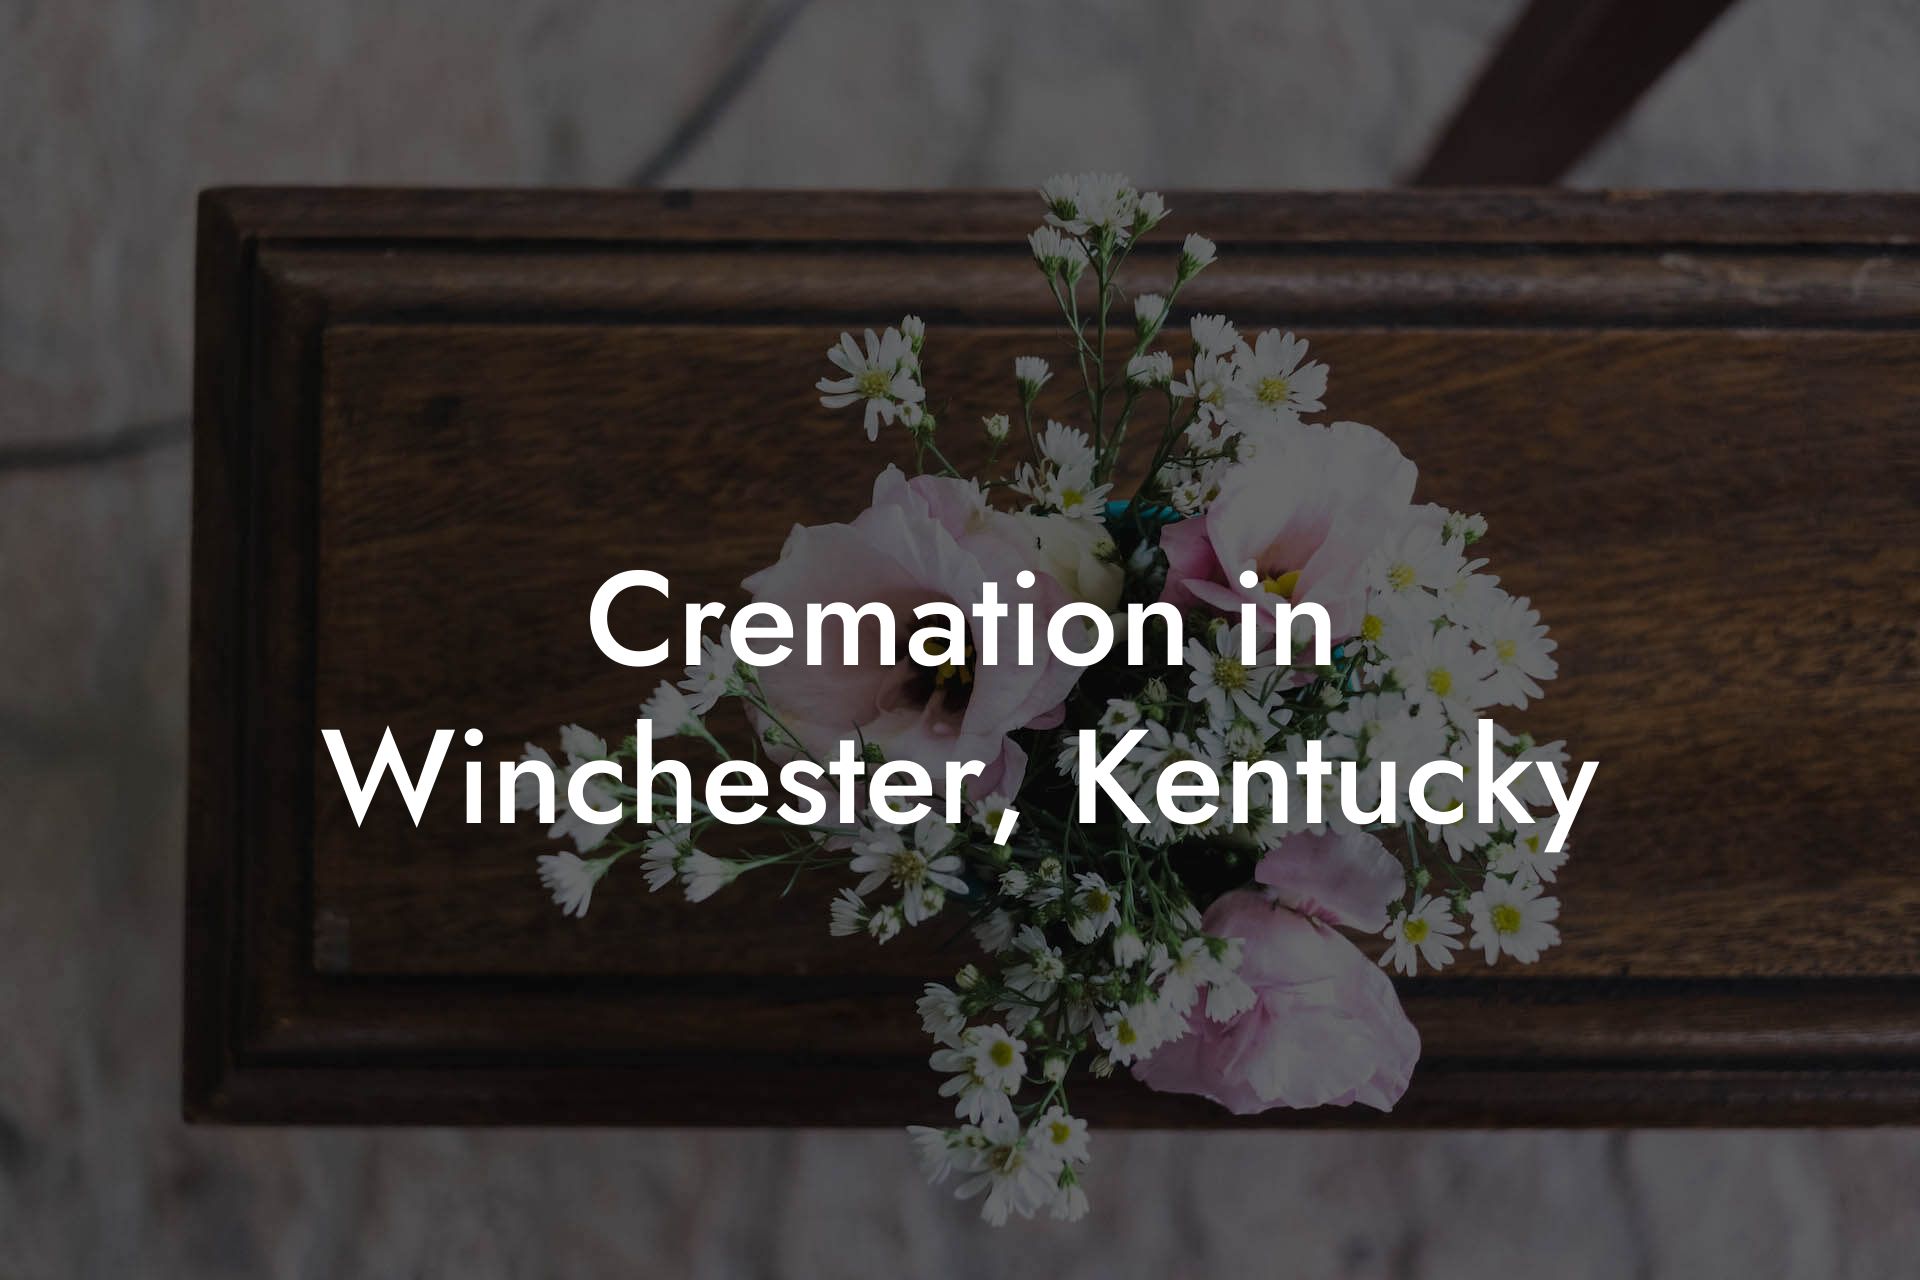 Cremation in Winchester, Kentucky